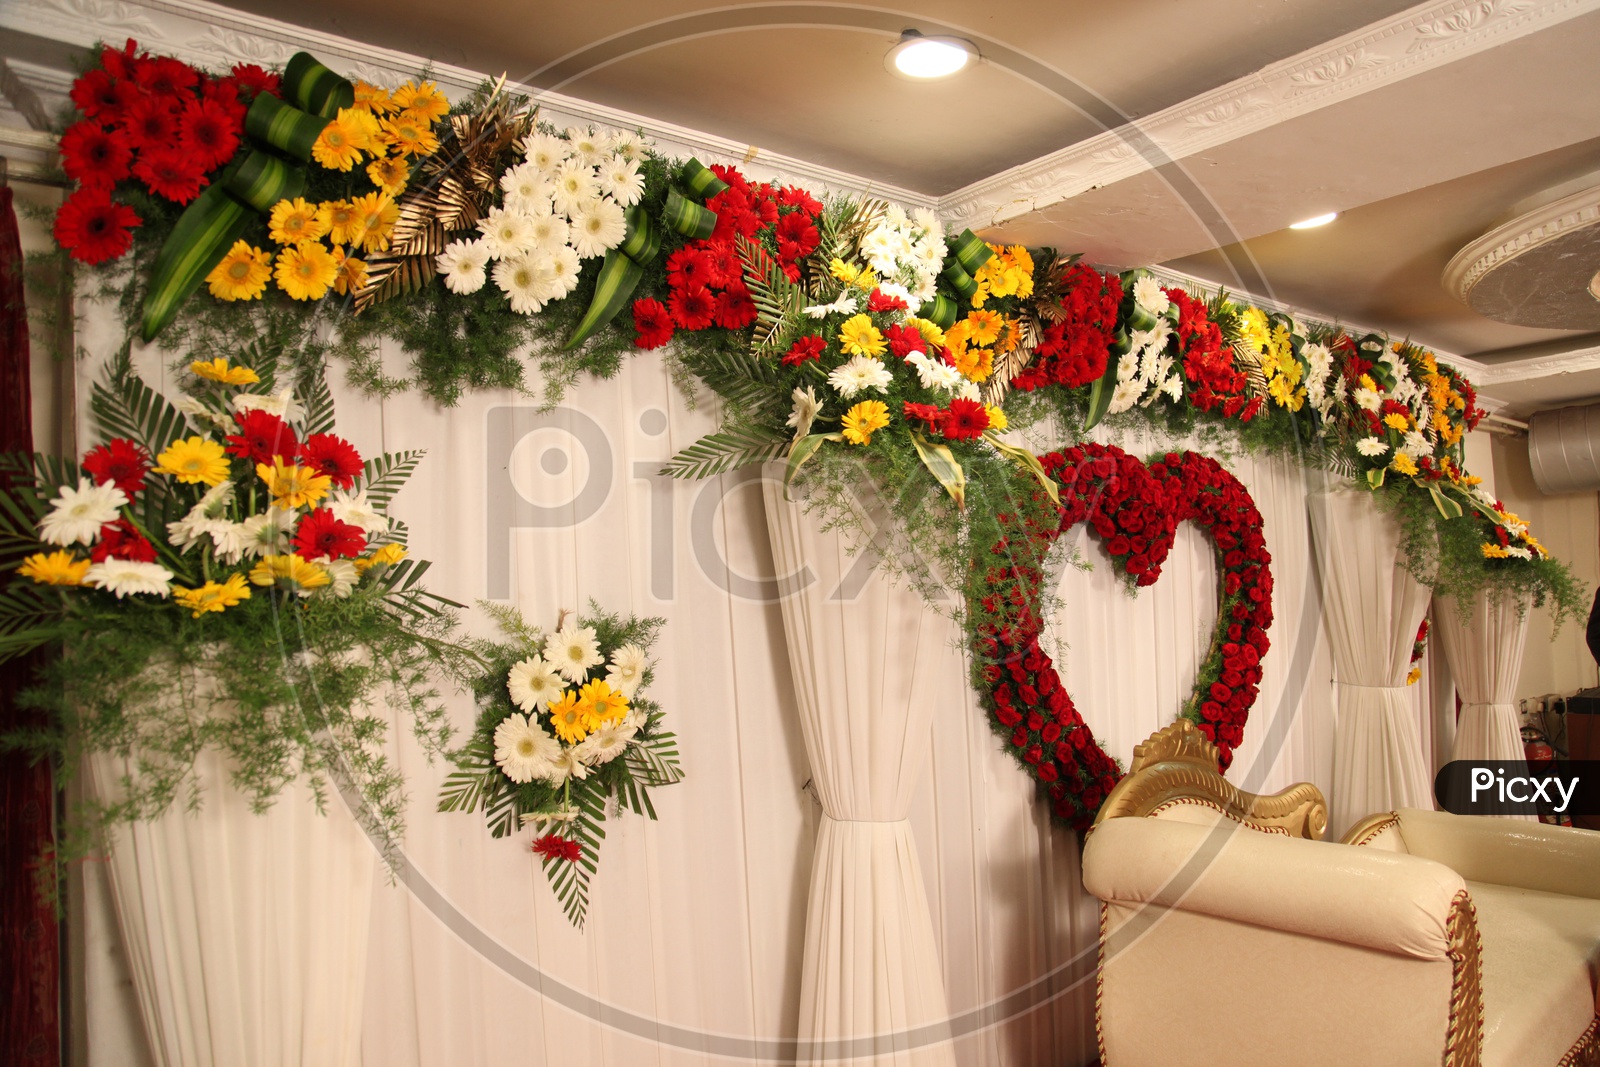 Decoration at a function hall